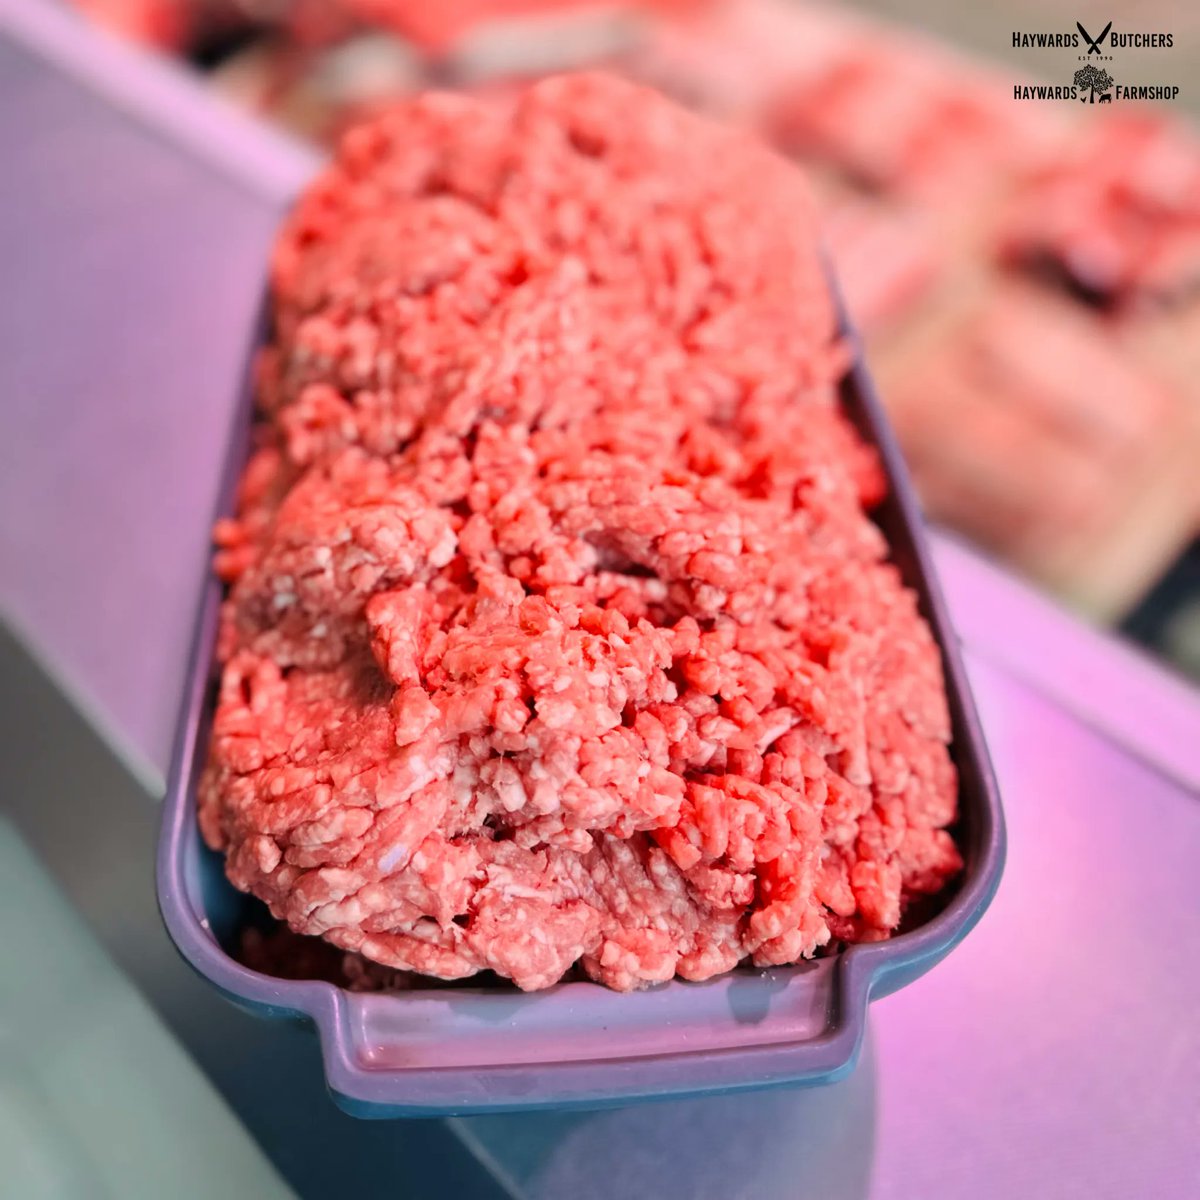 🐑🥩👨‍🍳🔪 Looking for a change in your weekly dinner routine? Why not try our locally sourced lamb mince! Perfect for shepherd's pie, moussaka, and more. 🍽️👌 #LambMince #LocallySourced #FarmToTable #HomeCooking #DeliciousDinners #hayward1990